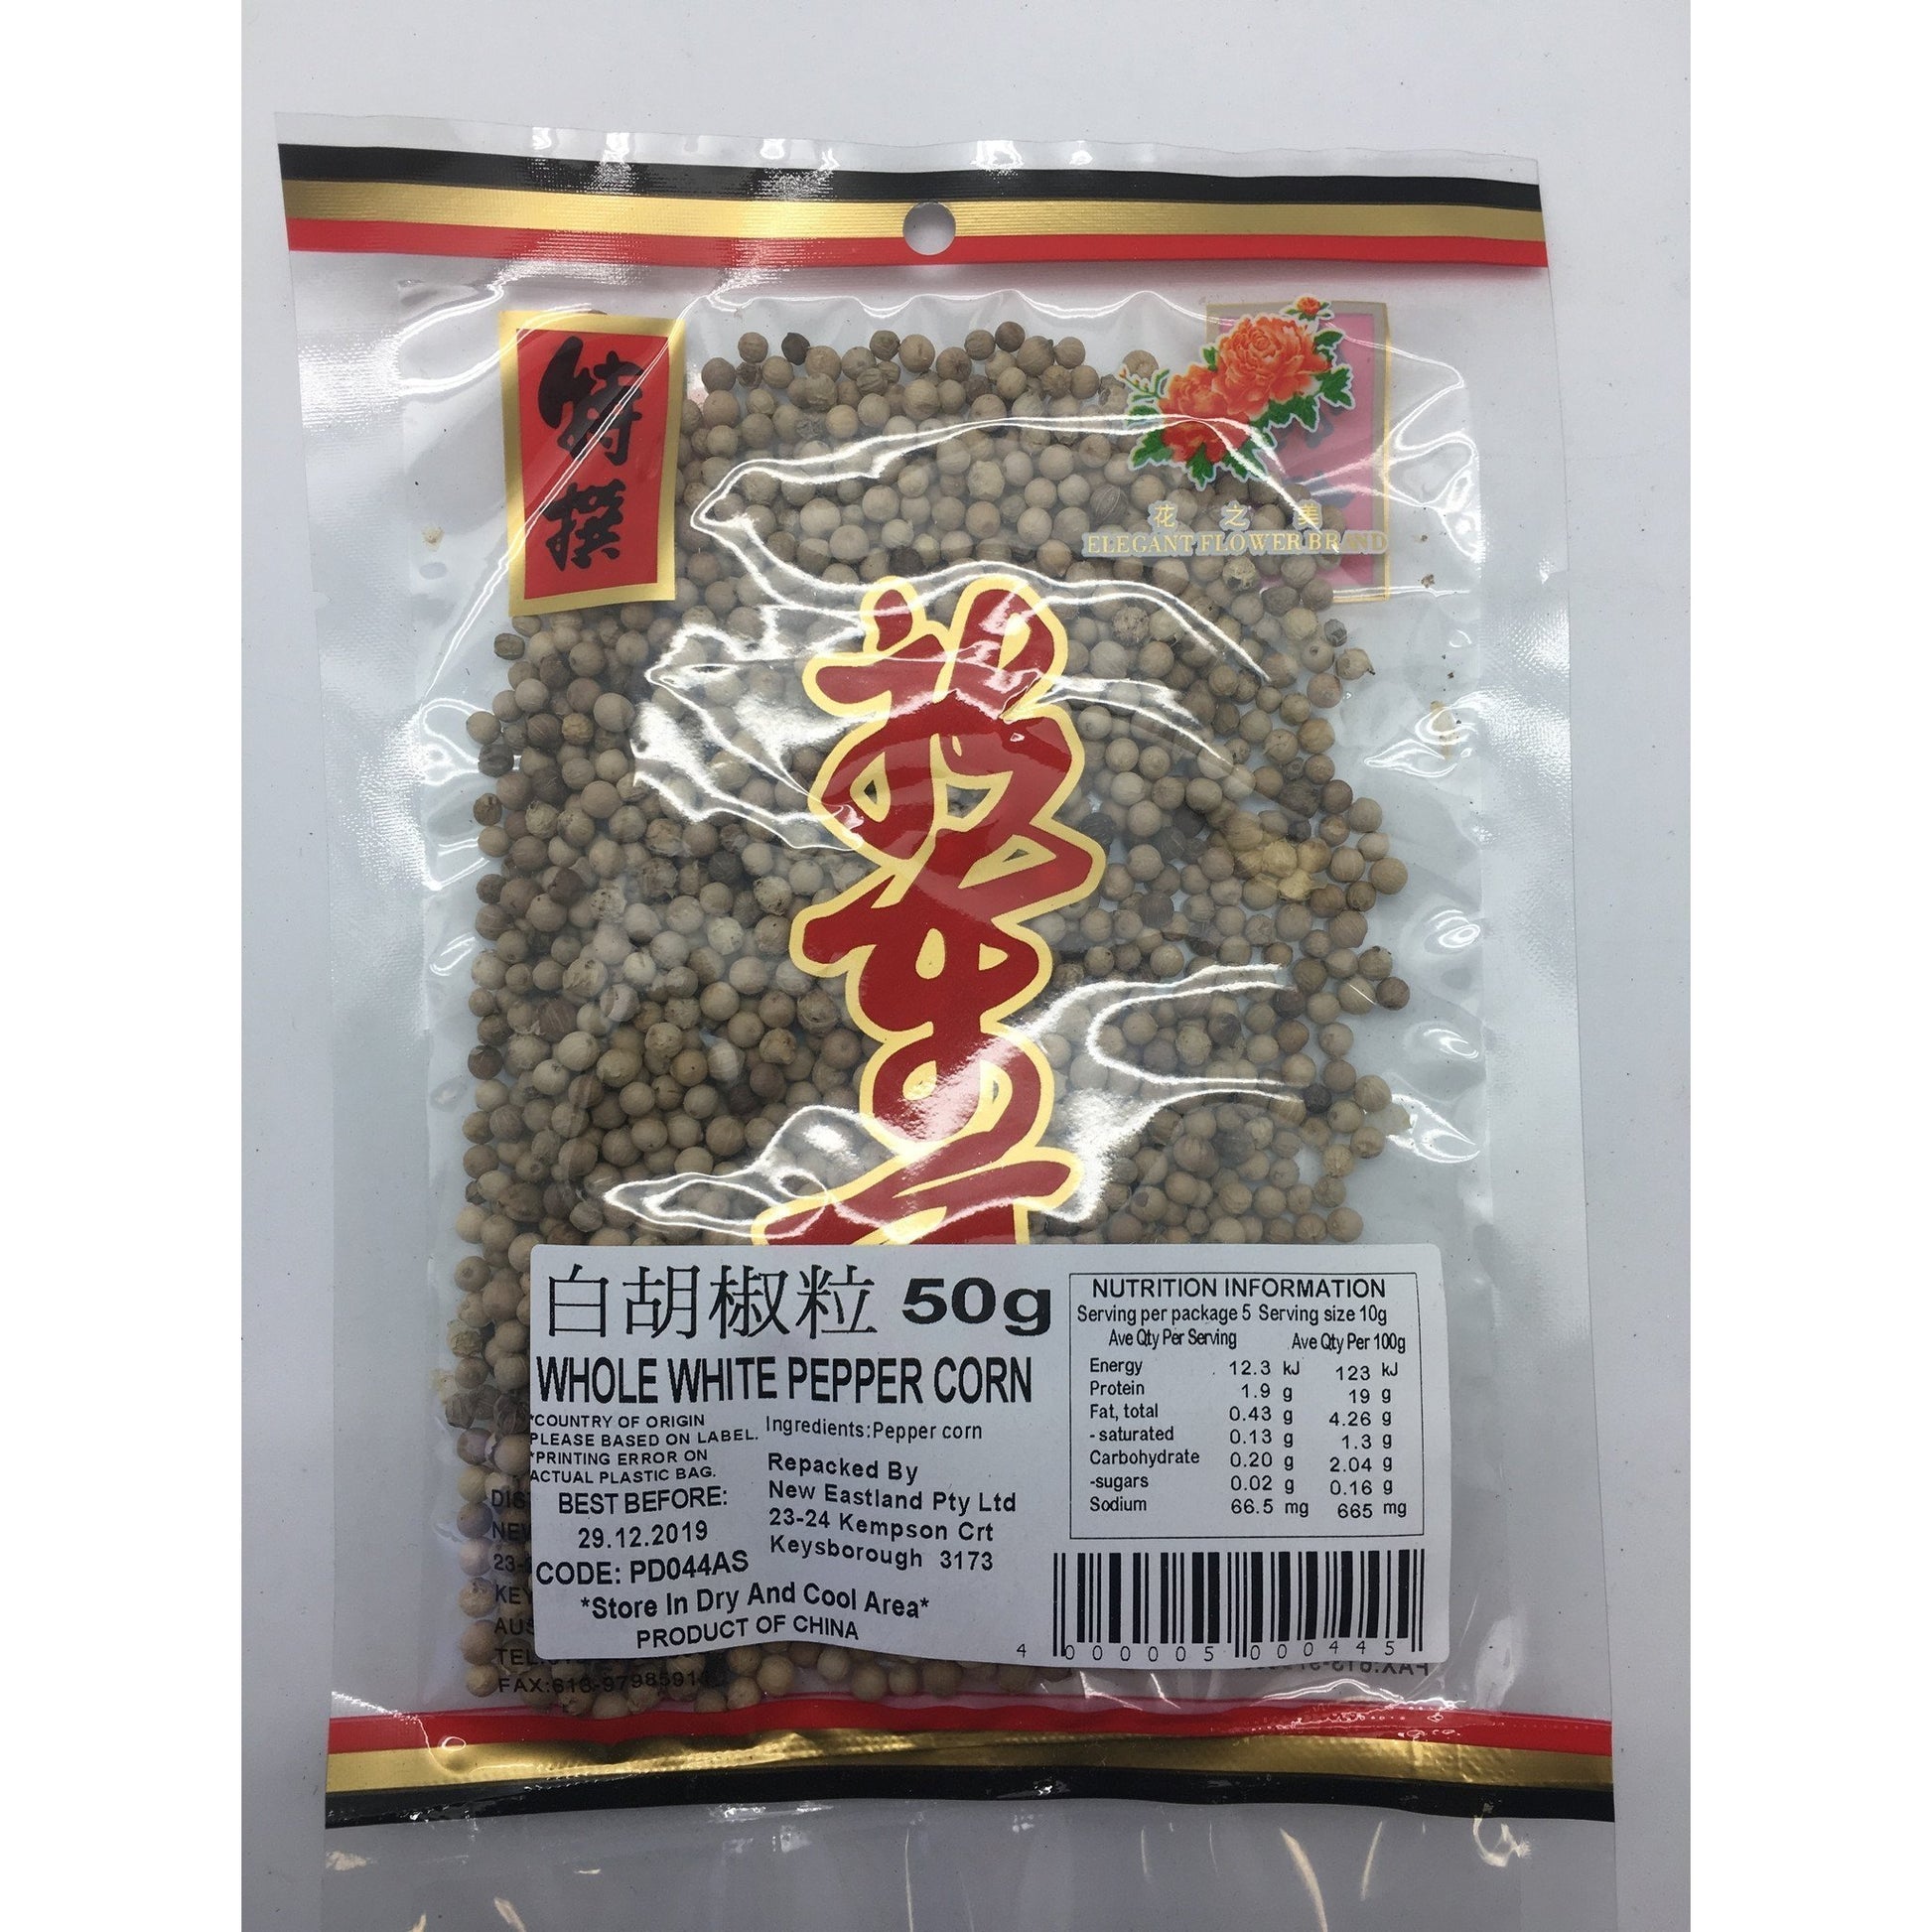 PD044BS New Eastland Pty Ltd - Whole White Pepper Corn 50g - 10 packets / 1 Bag - New Eastland Pty Ltd - Asian food wholesalers